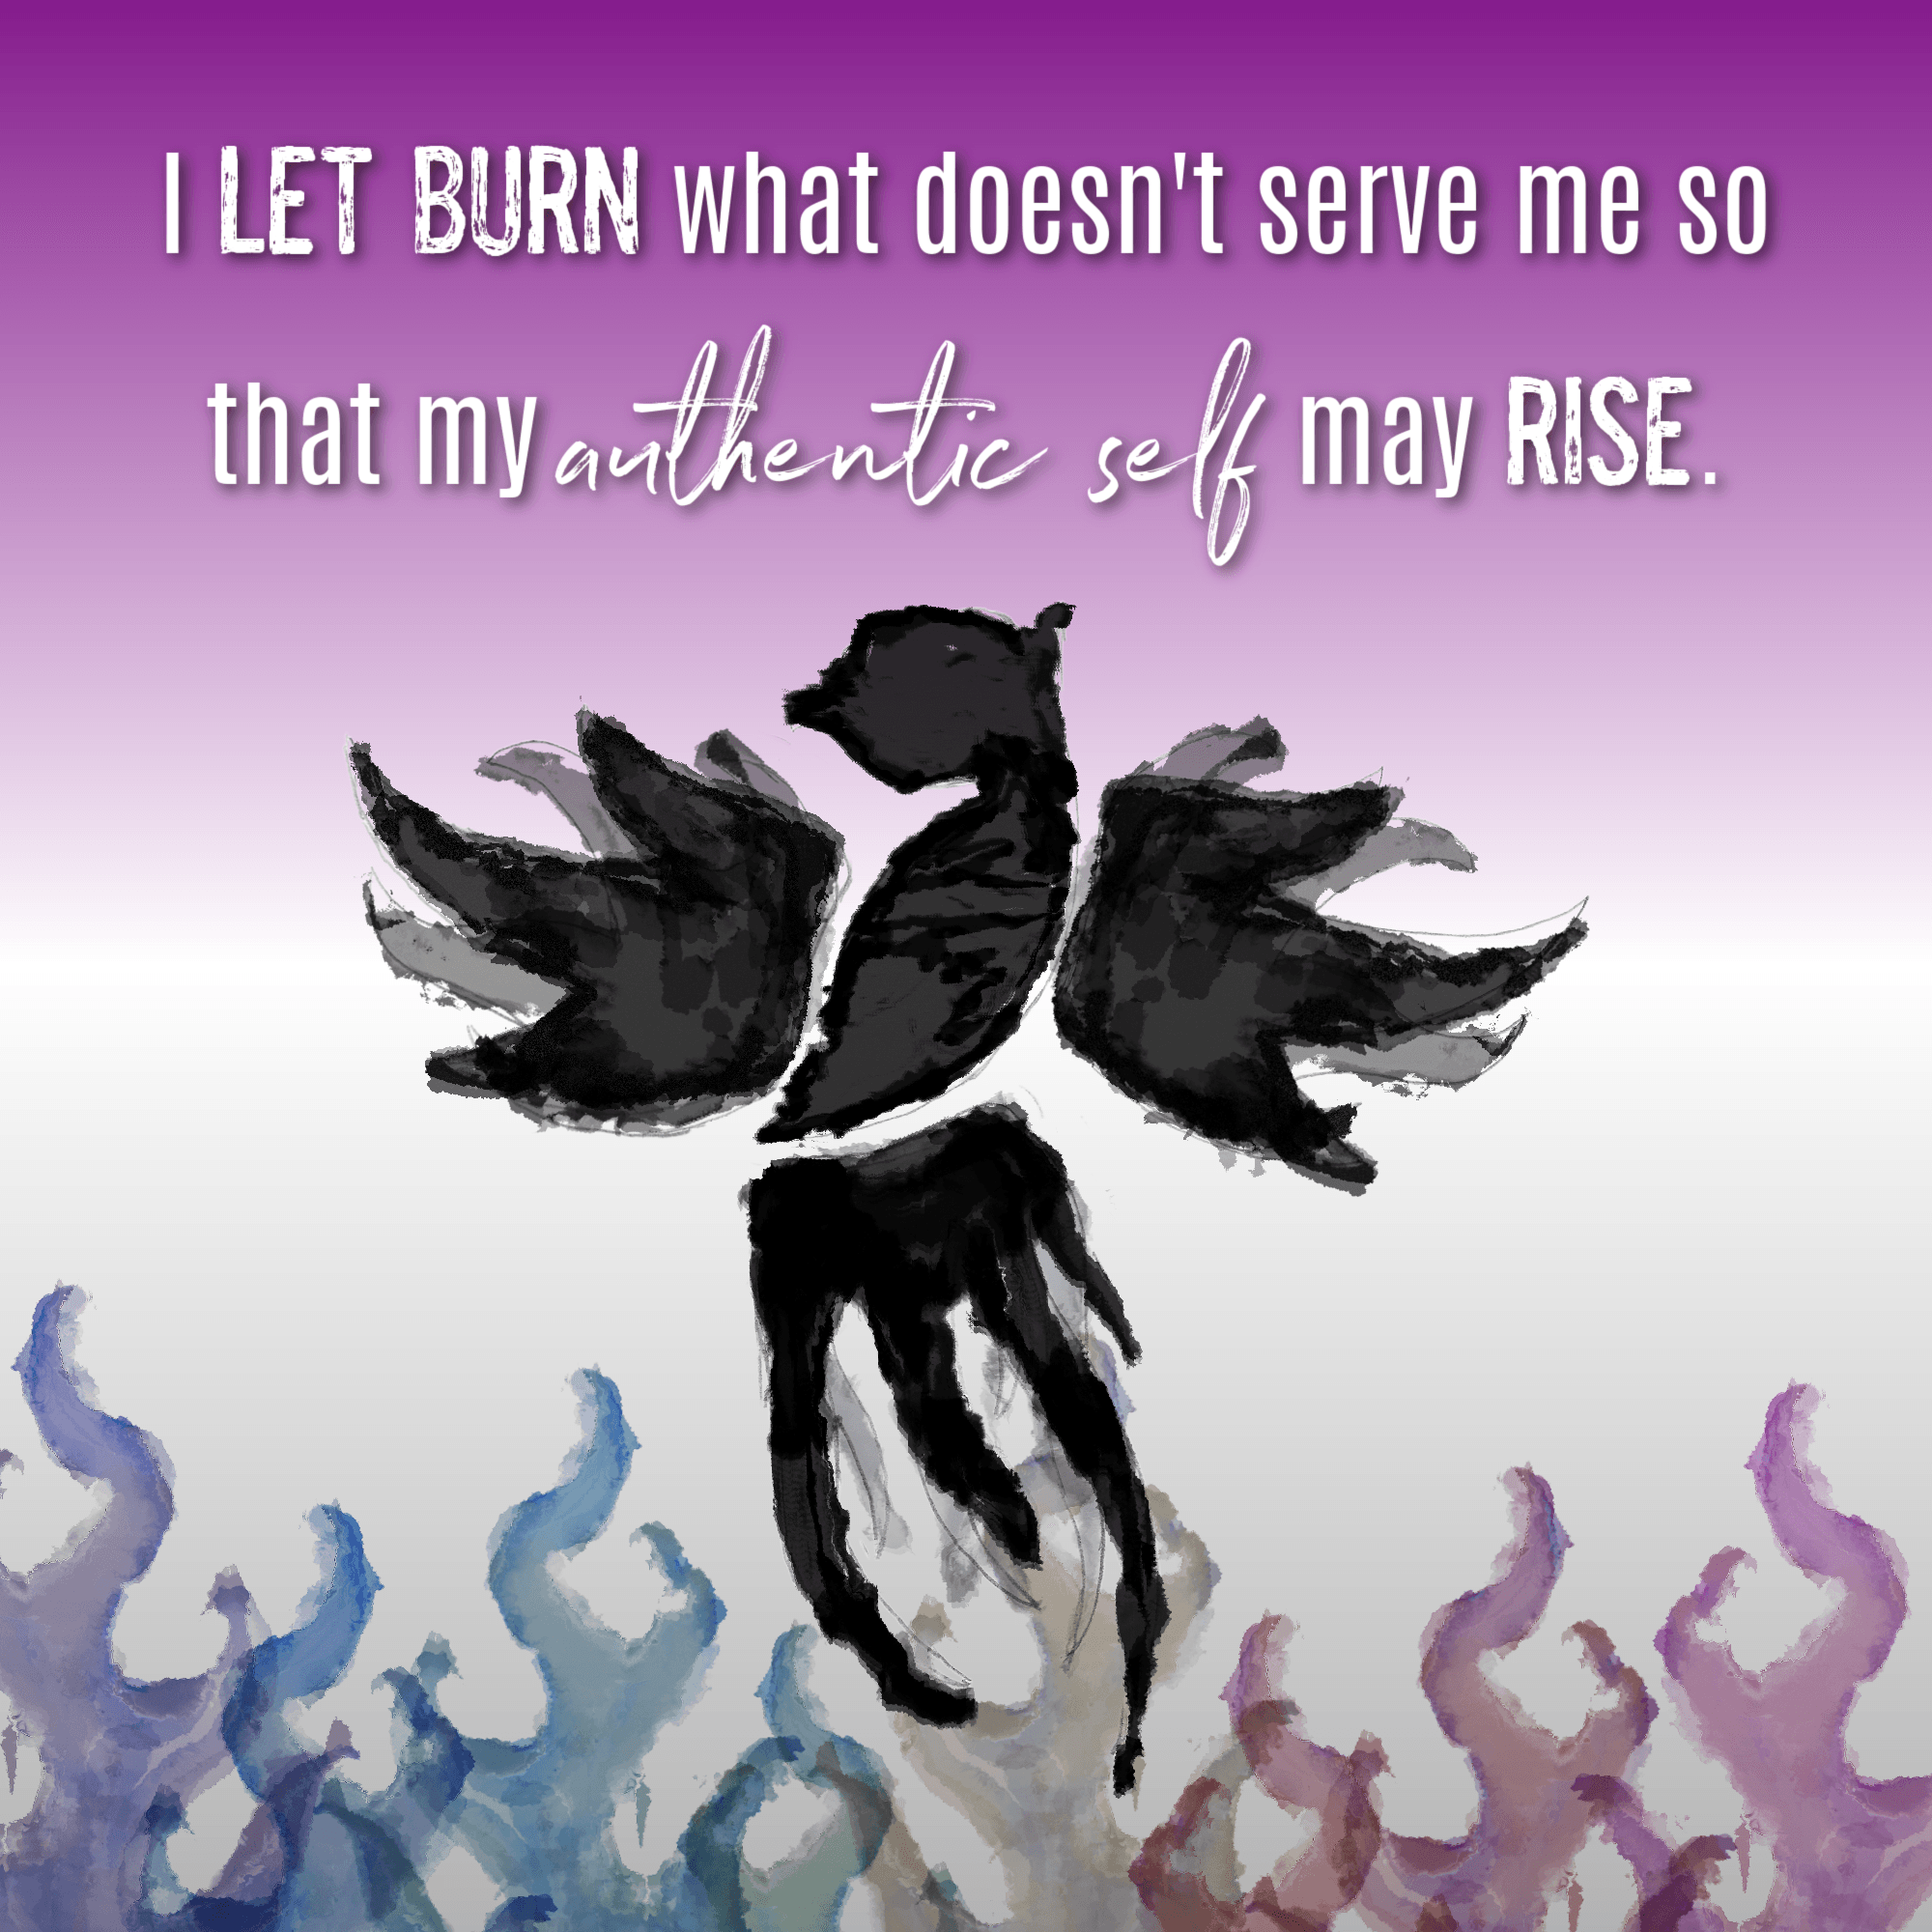 Phoenix Rising - Asexual Edition